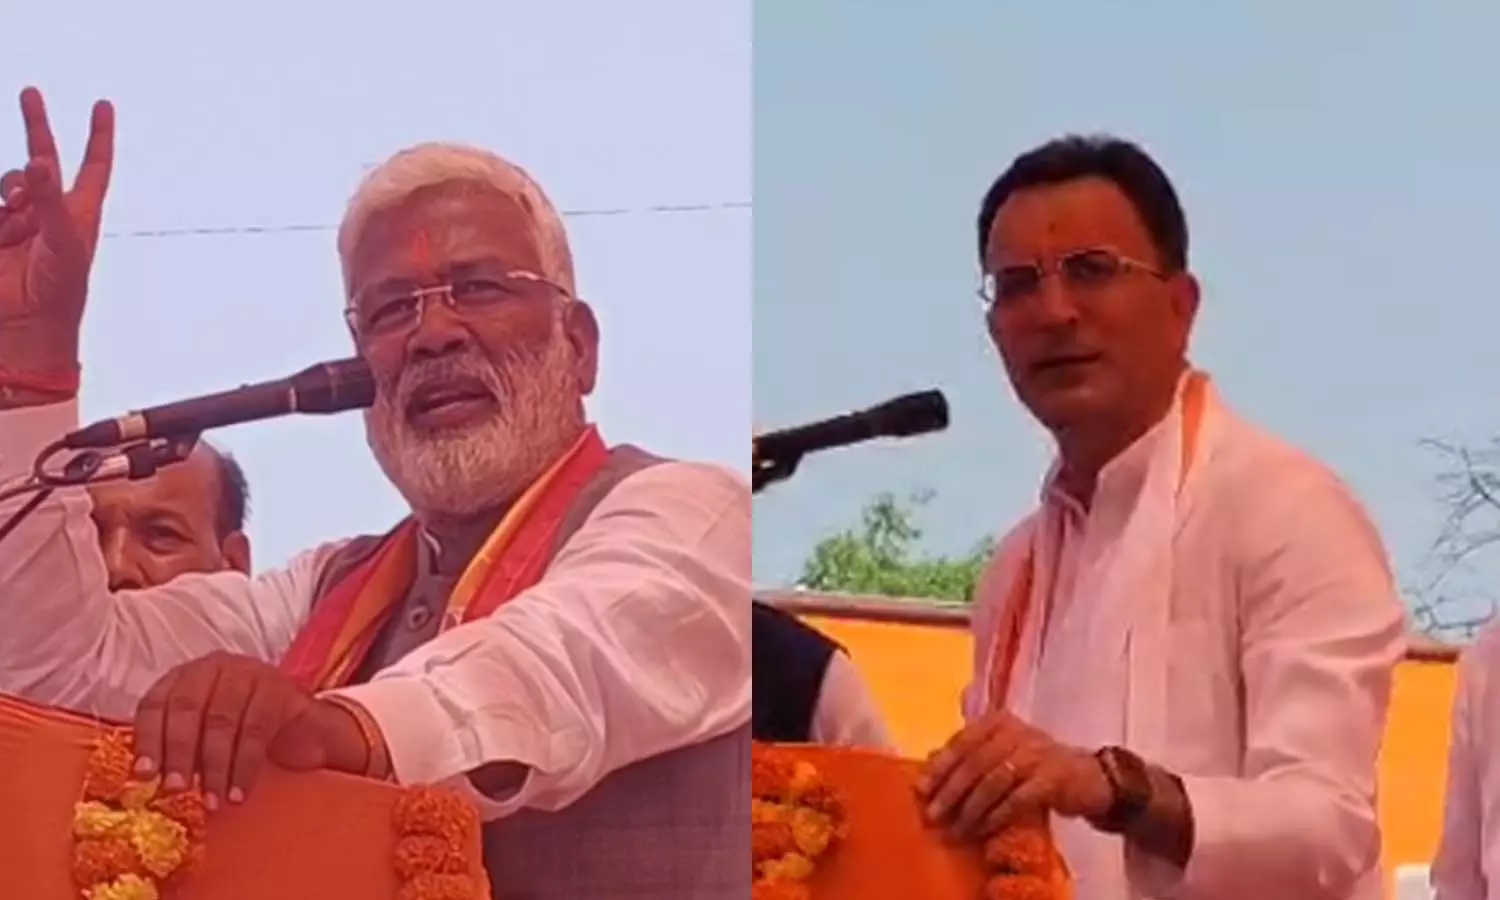 Jal Shakti Minister Swatantra Dev Singh appealed to the public in support of Jitin Prasad, said- vote for nation building and development